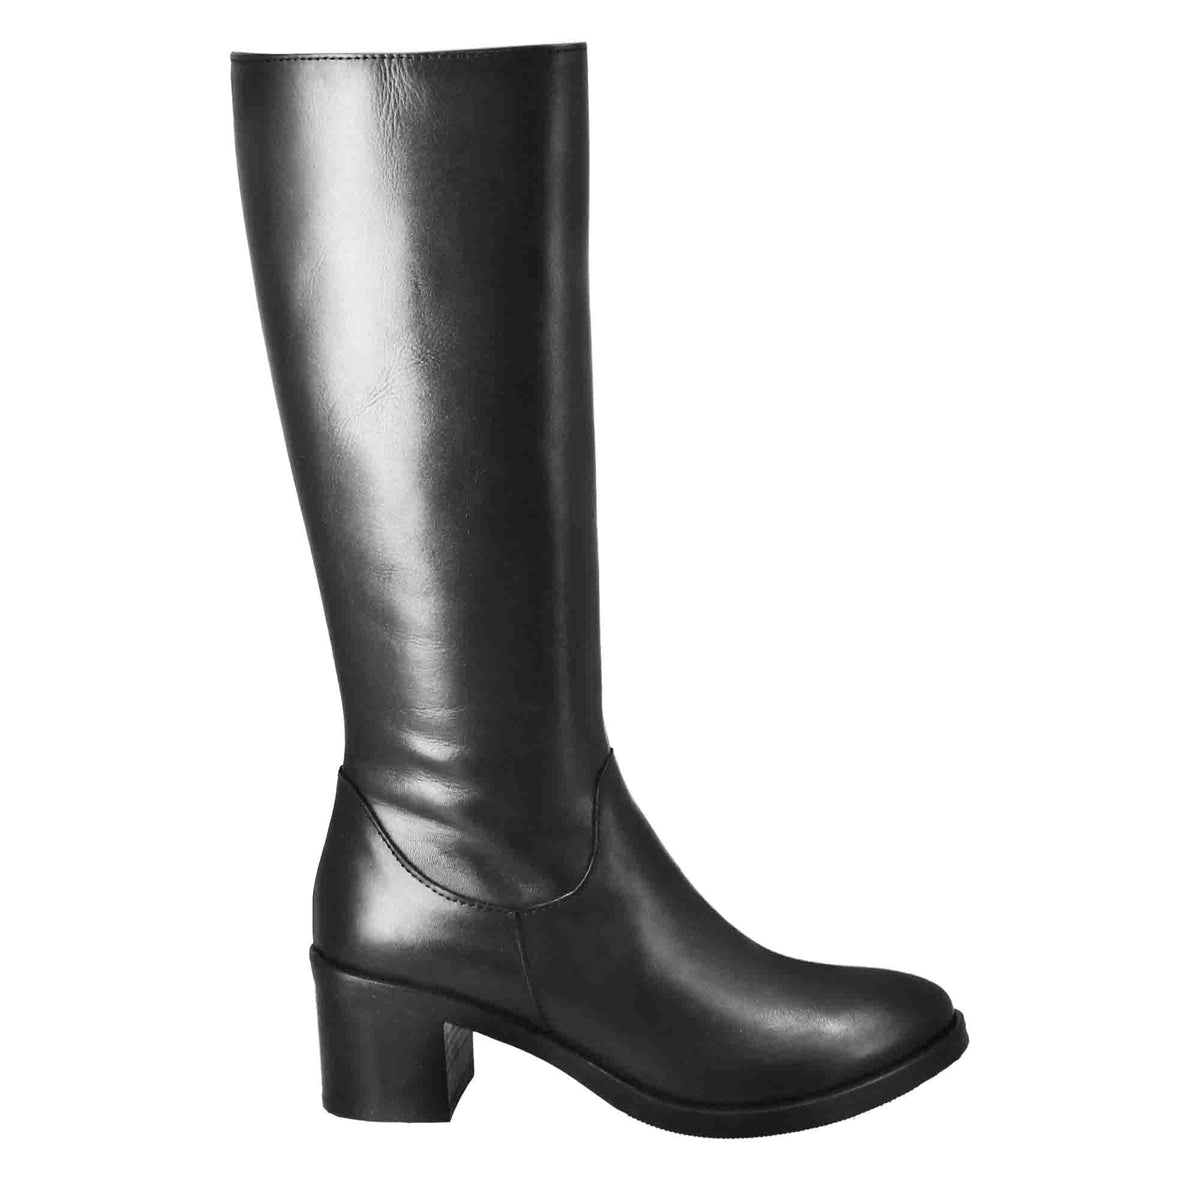 Smooth women's knee-high boots with medium heel in black leather